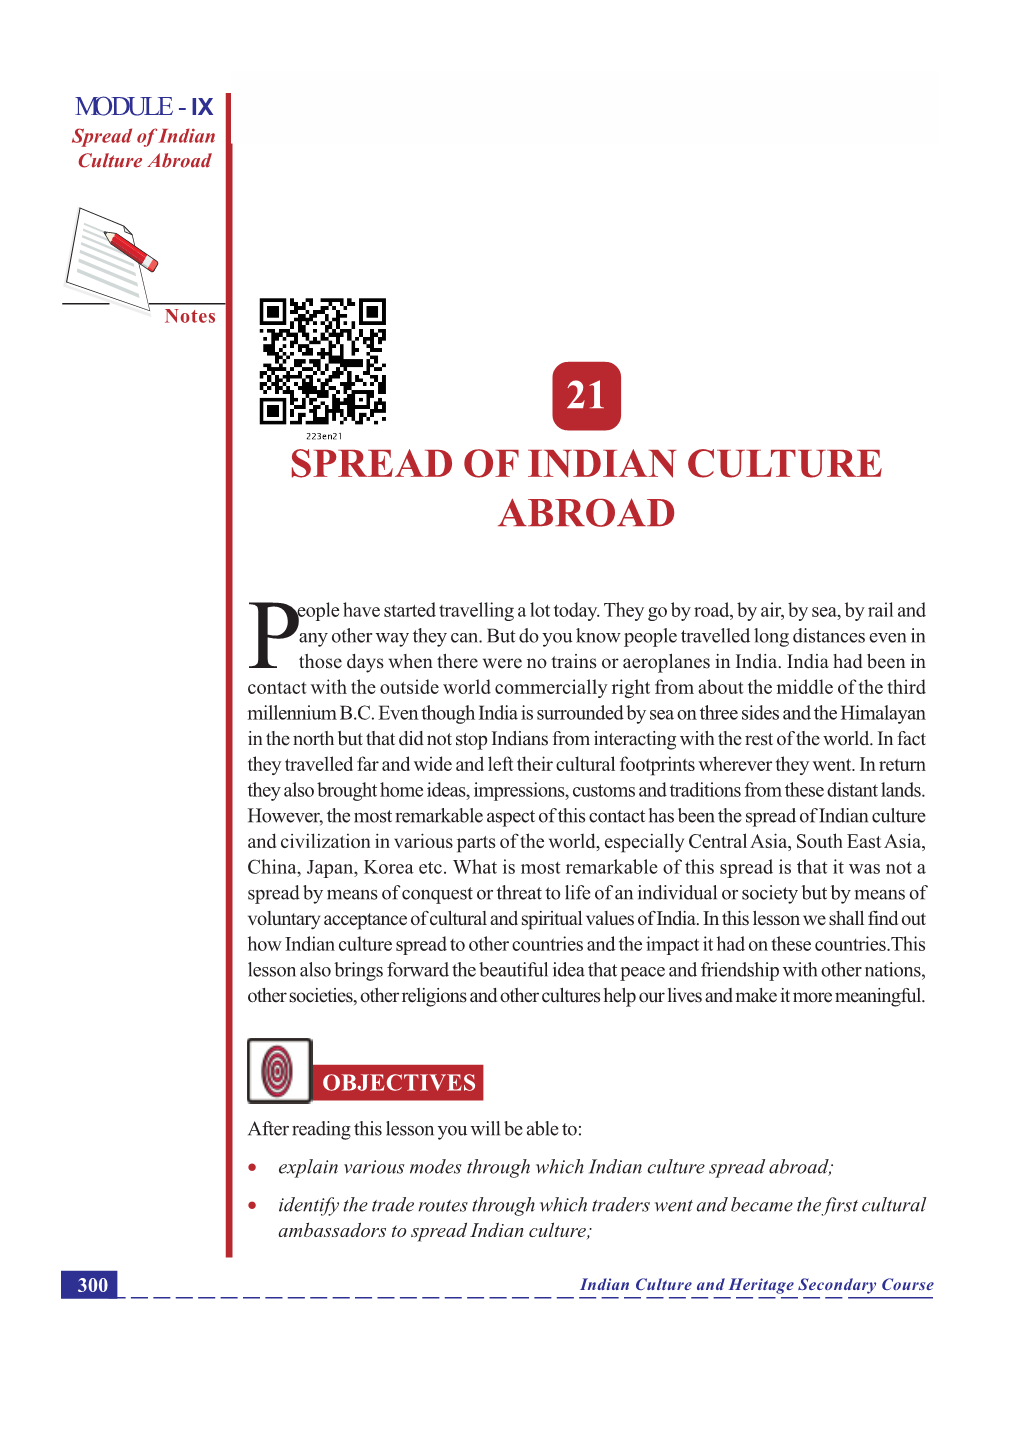 21. Spread of Indian Culture Abroad(5.2